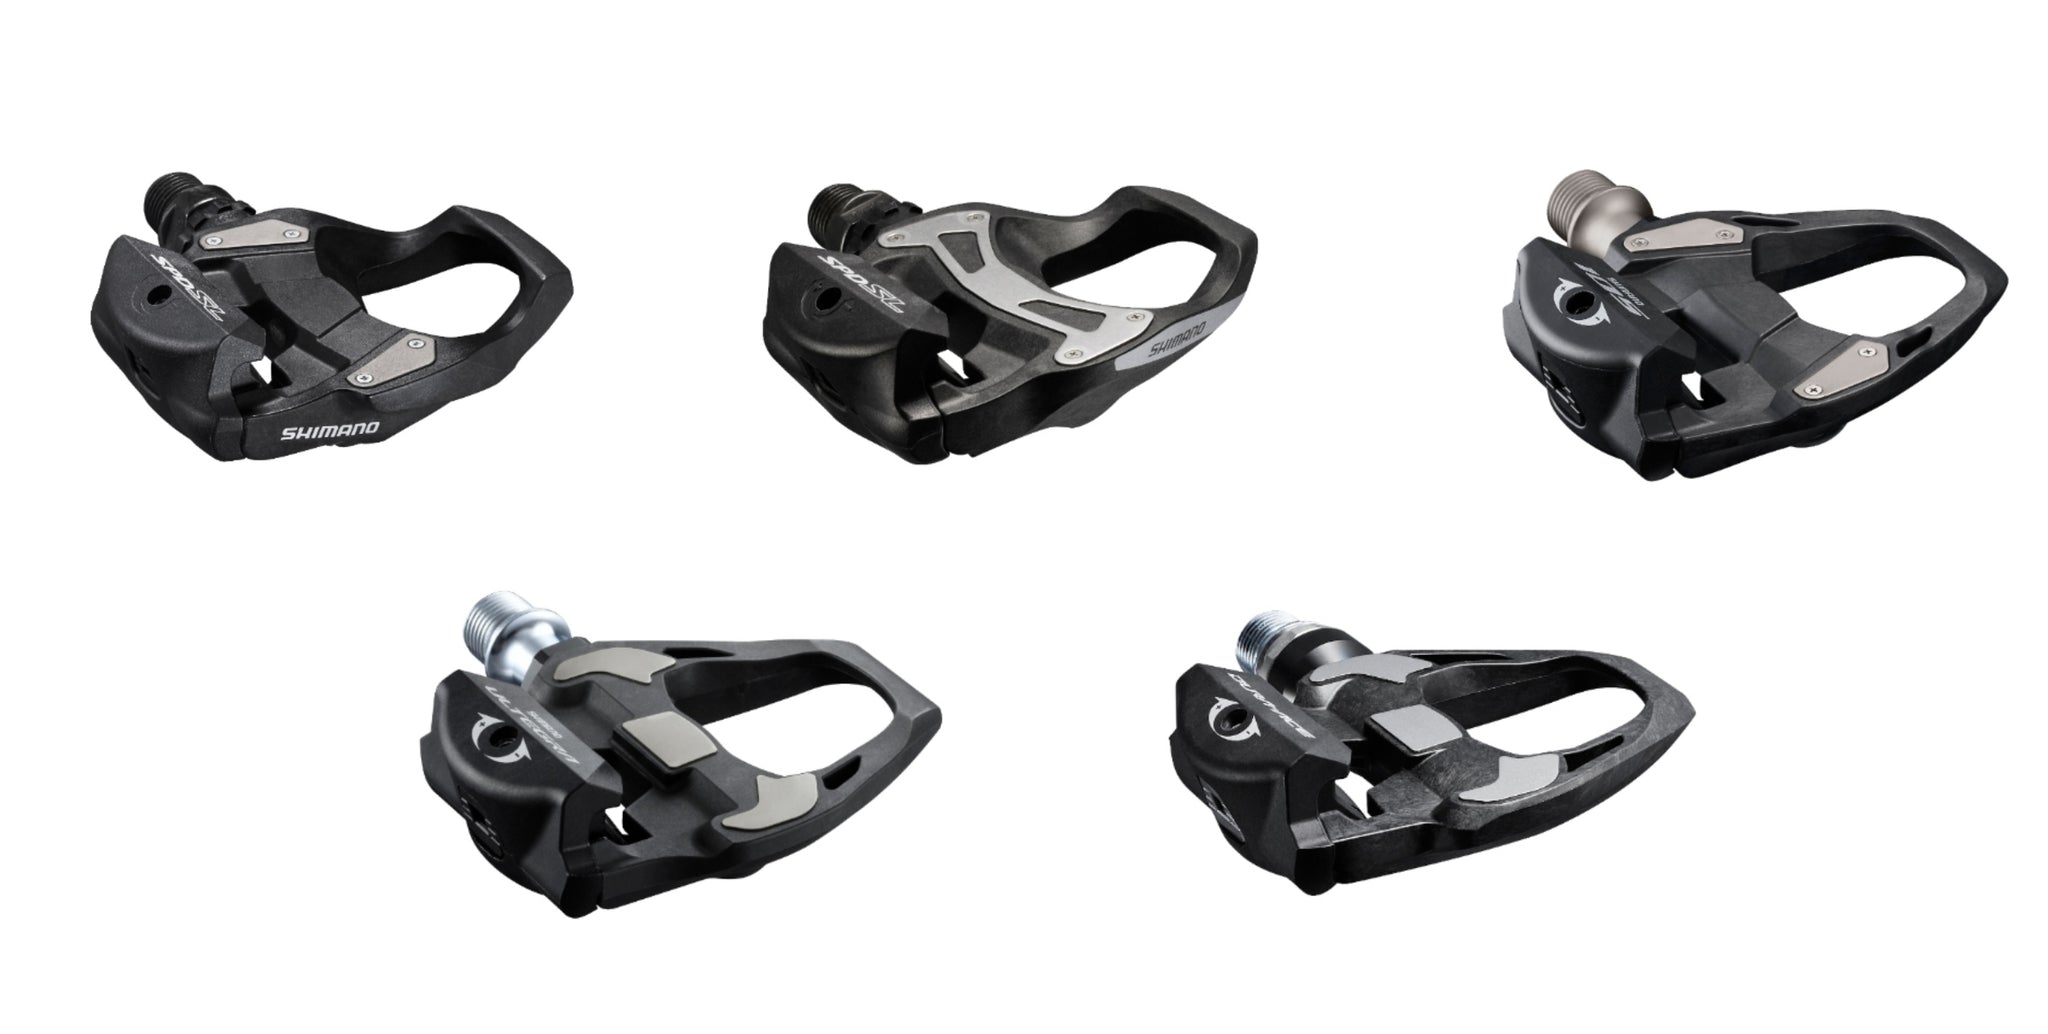 Shimano SPD-SL clipless road bike pedals